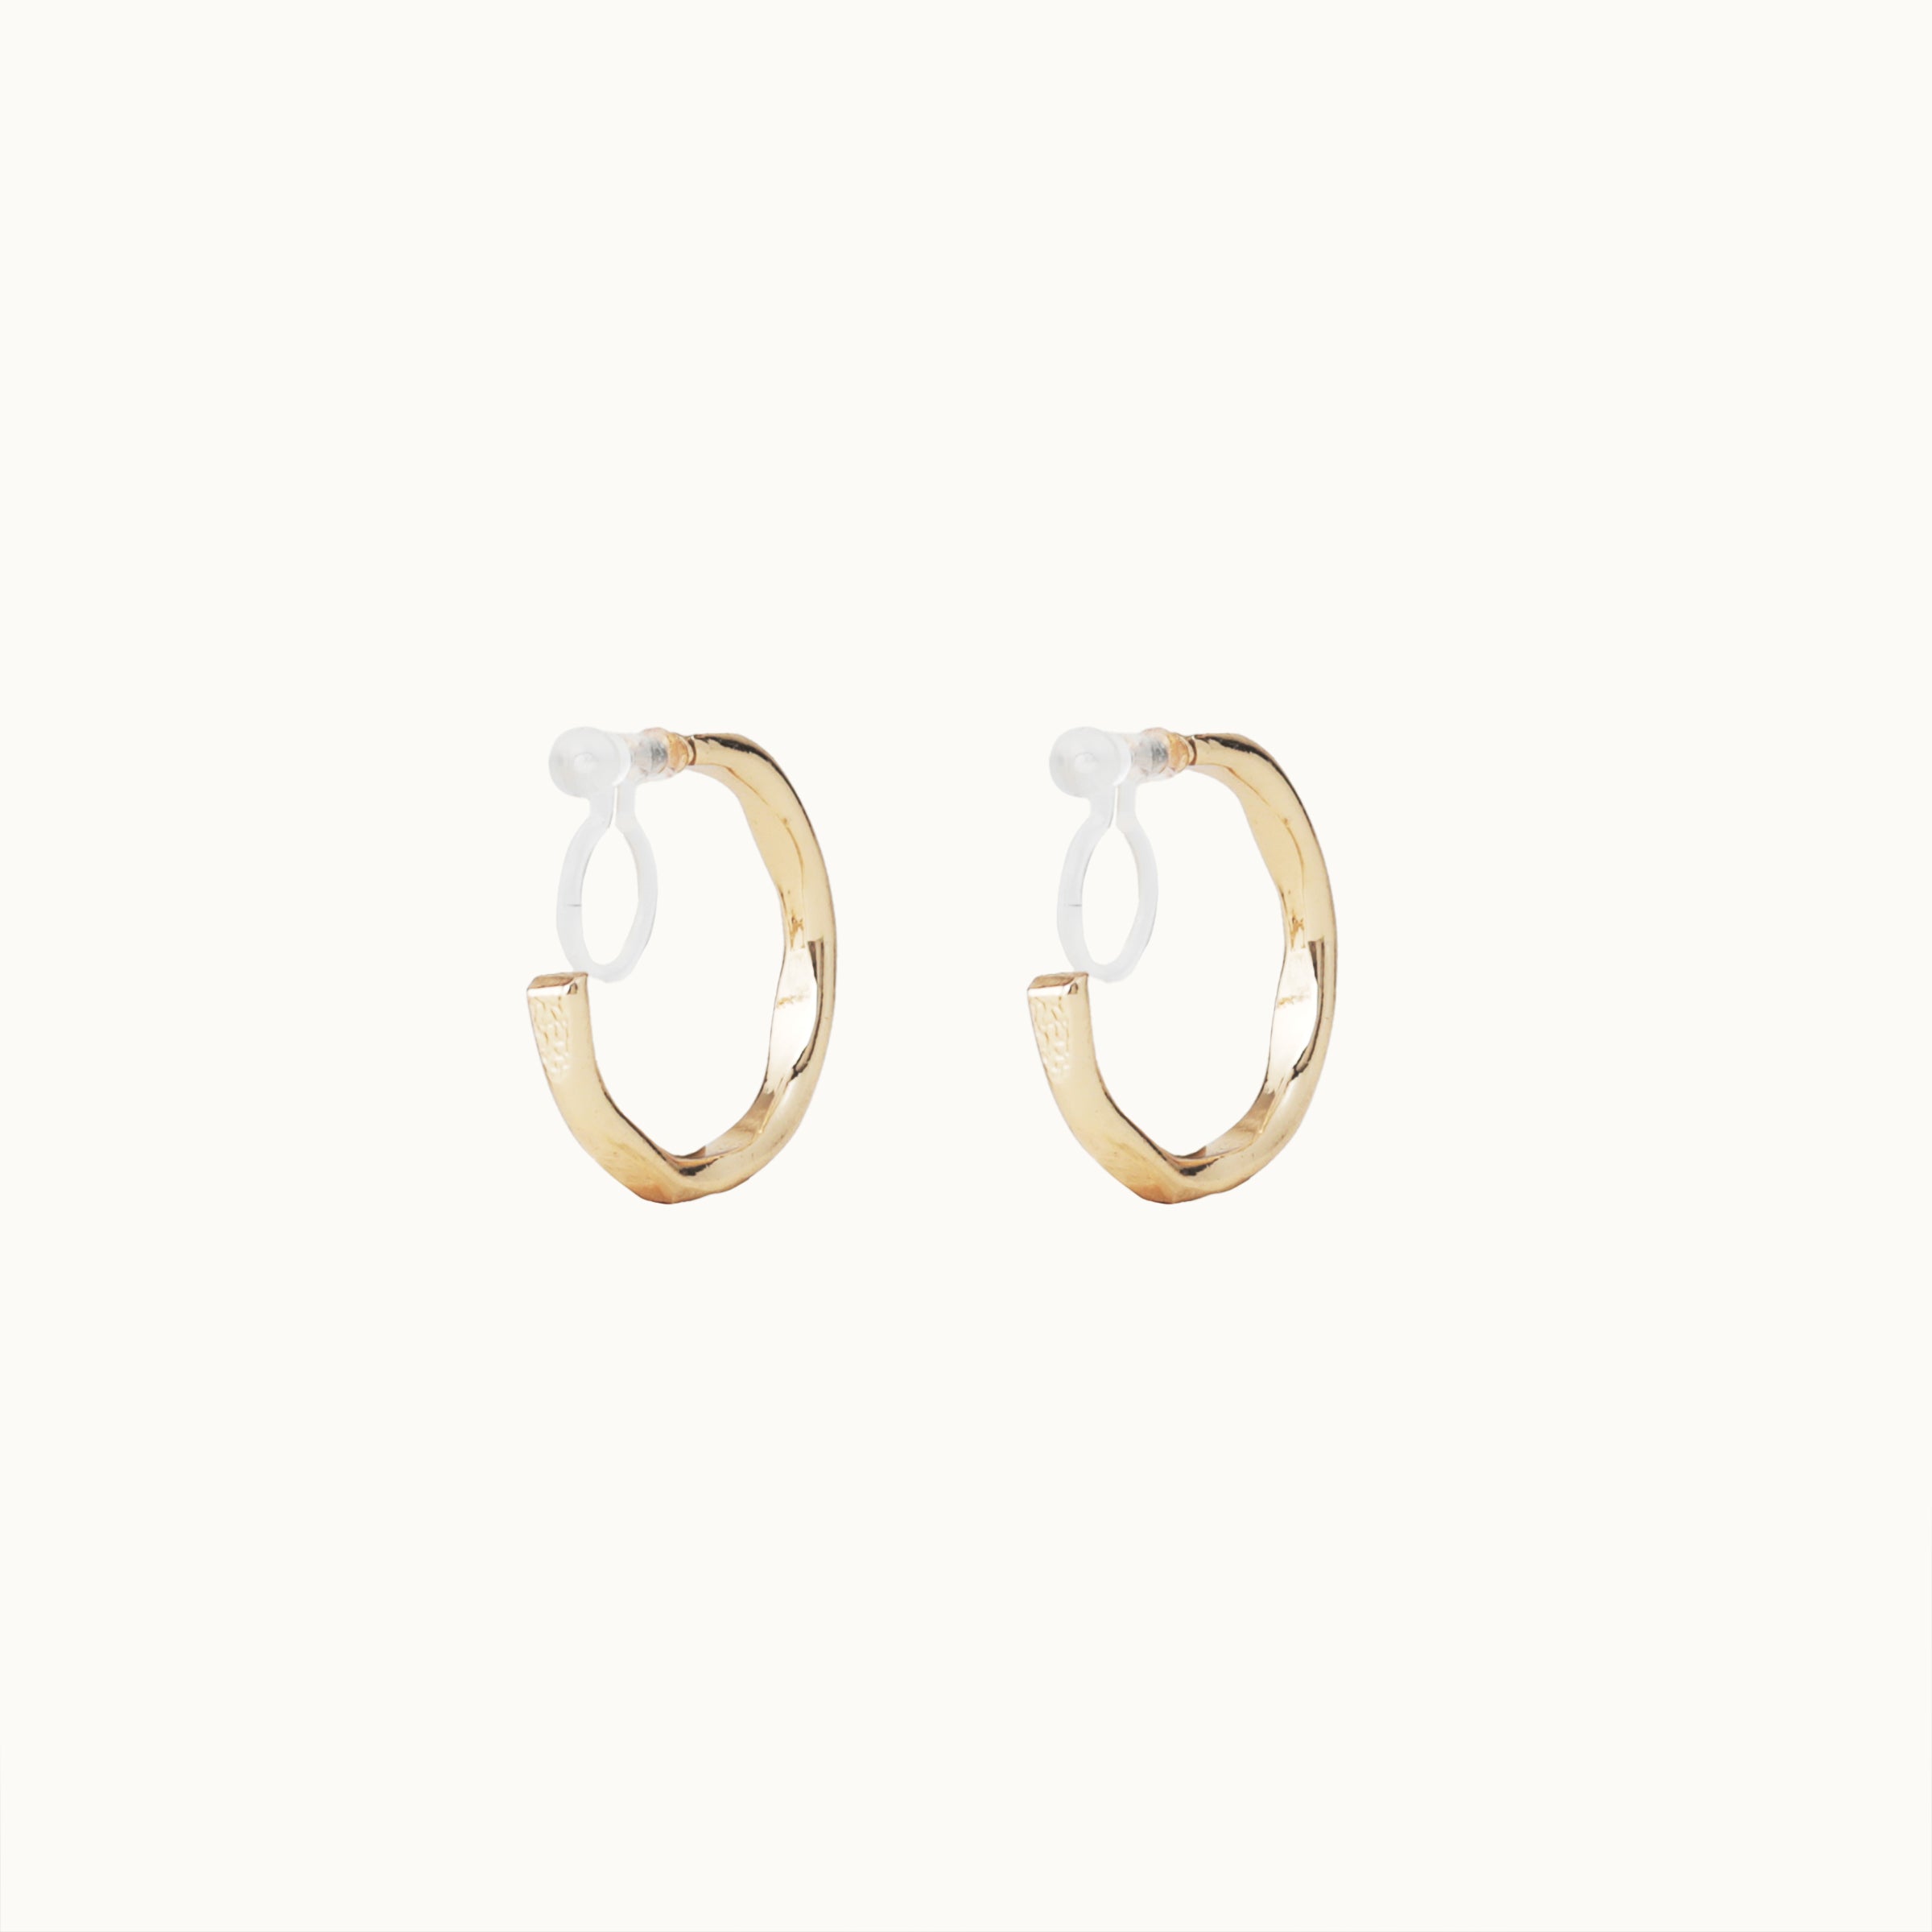 Image of the Smith Hoop Clip On Earrings in Gold, perfect for all ear sizes. With a resin clip-on closure and medium secure hold, these earrings provide comfort for 8-12 hours. Whether you have thick, large, or sensitive ears, these earrings are a must-have! Note: No adjustments possible and one pair only.